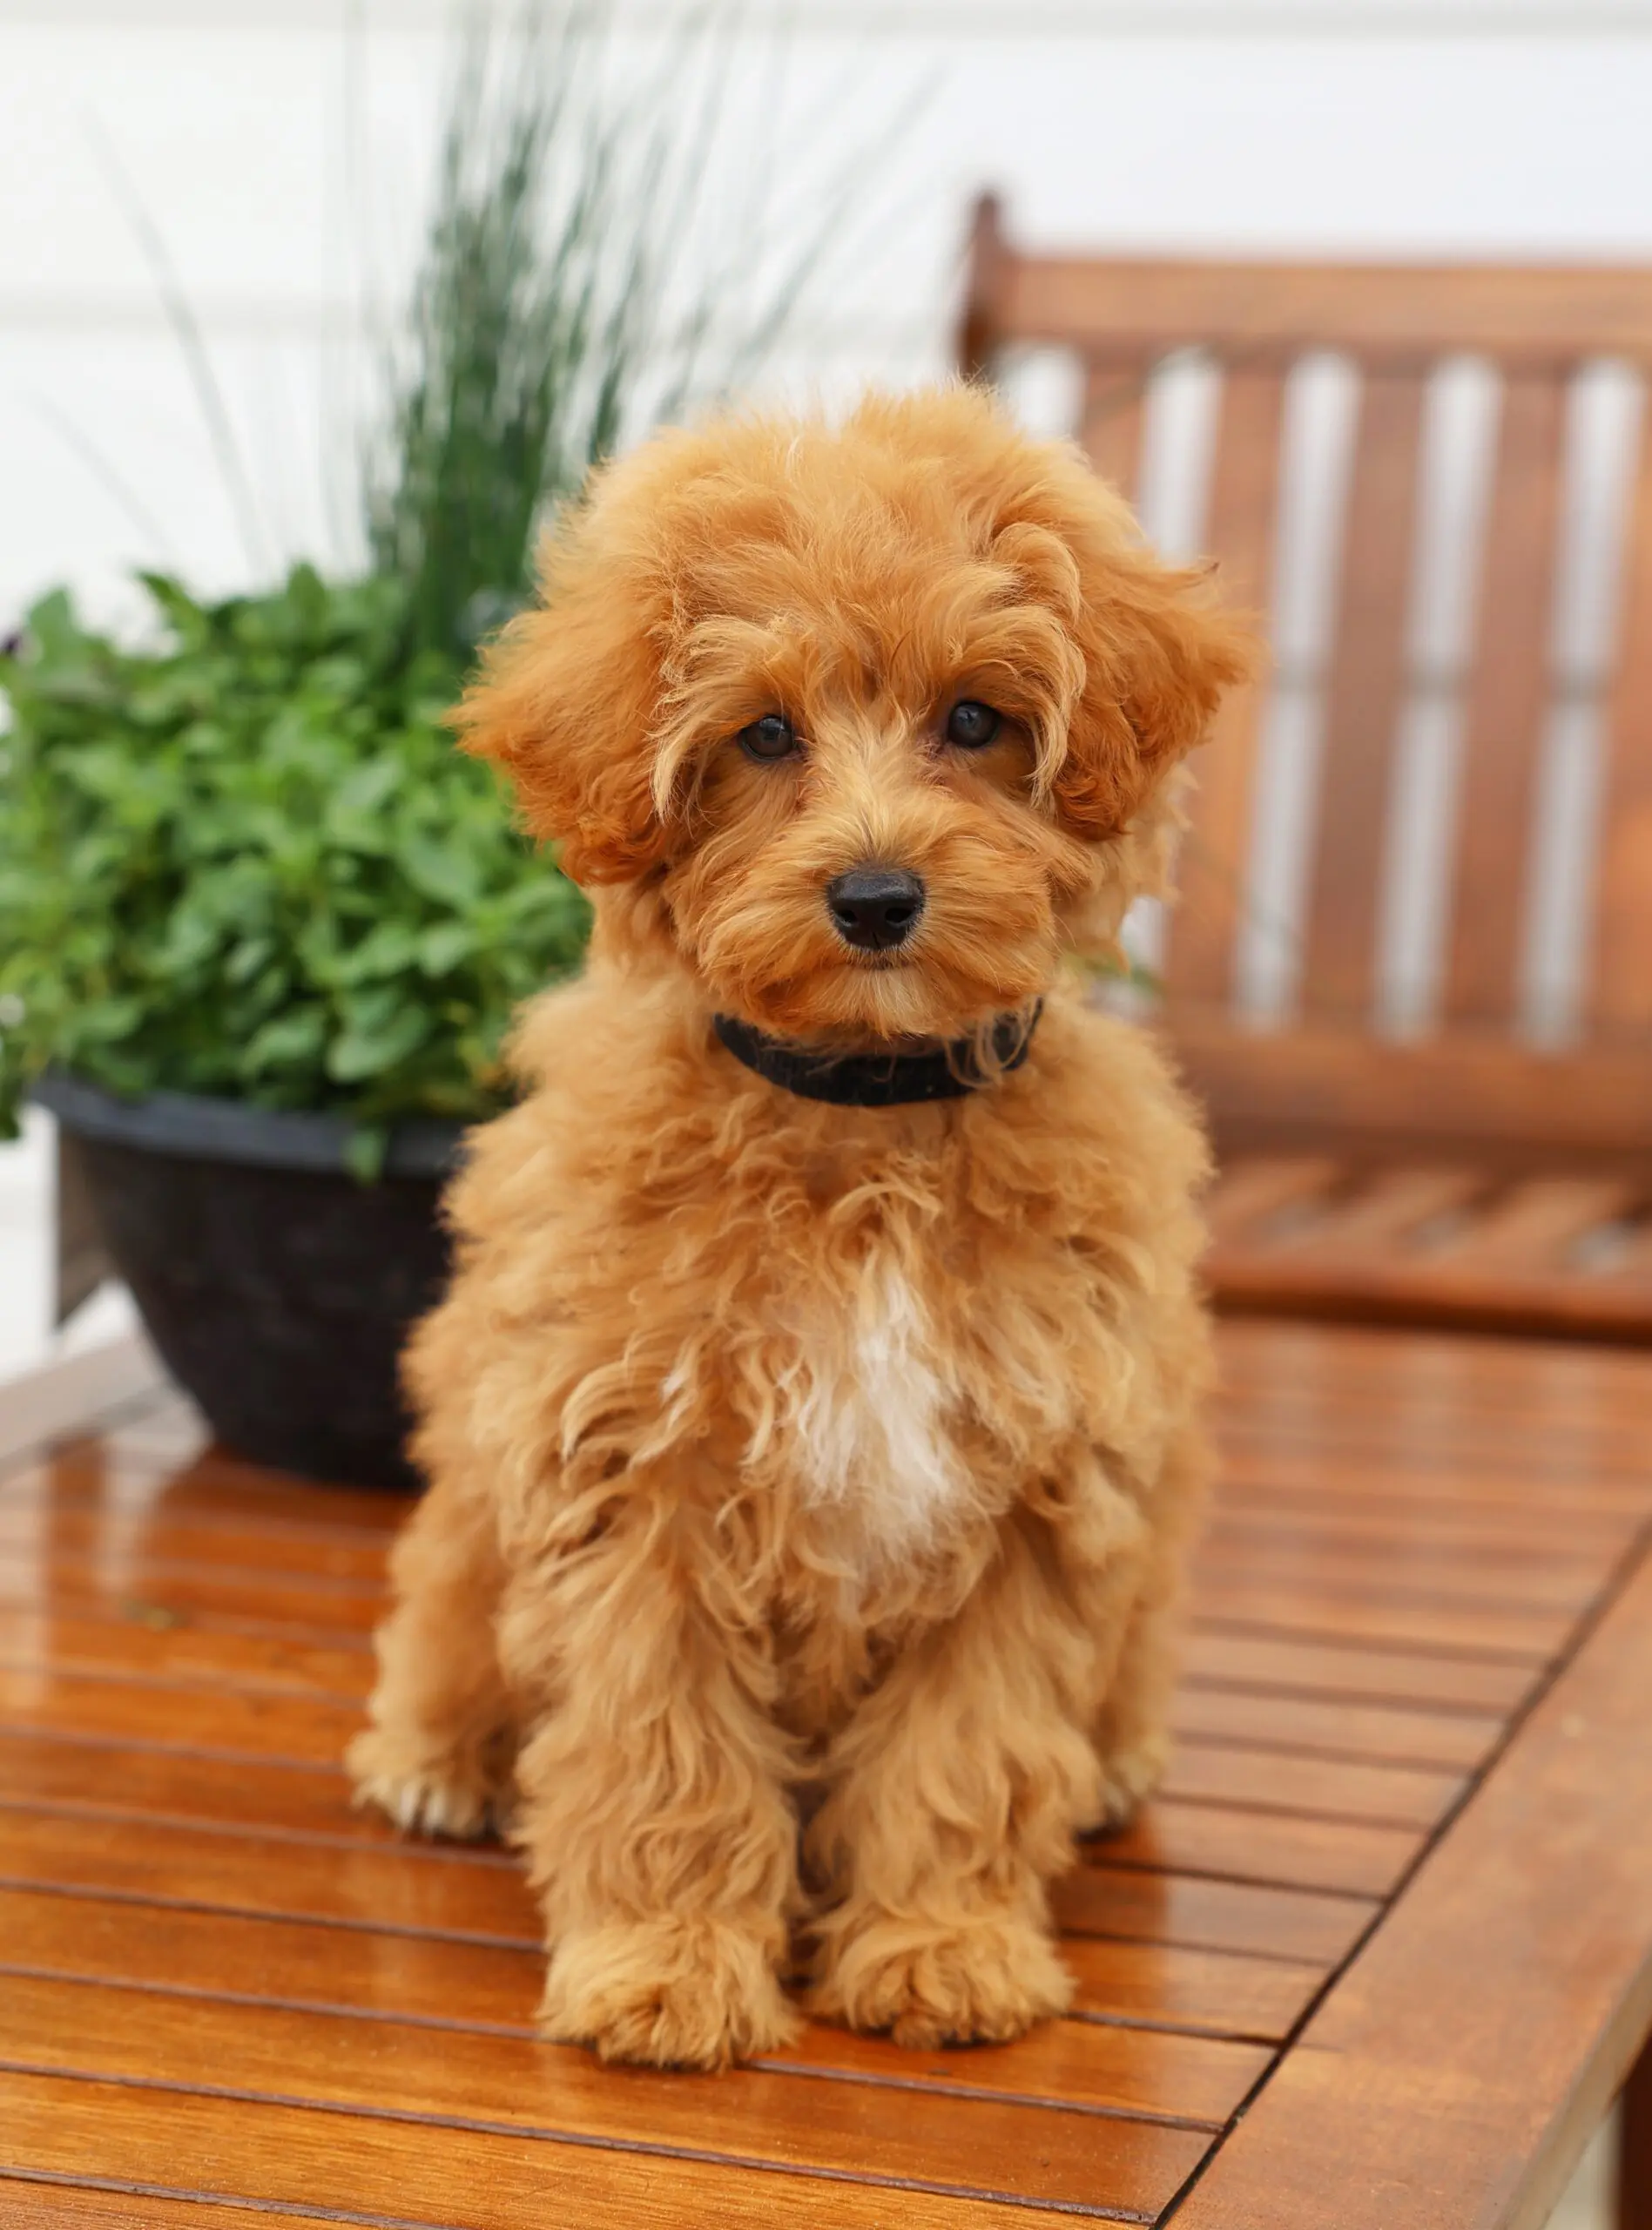 A Small red teddy bear schnoodle